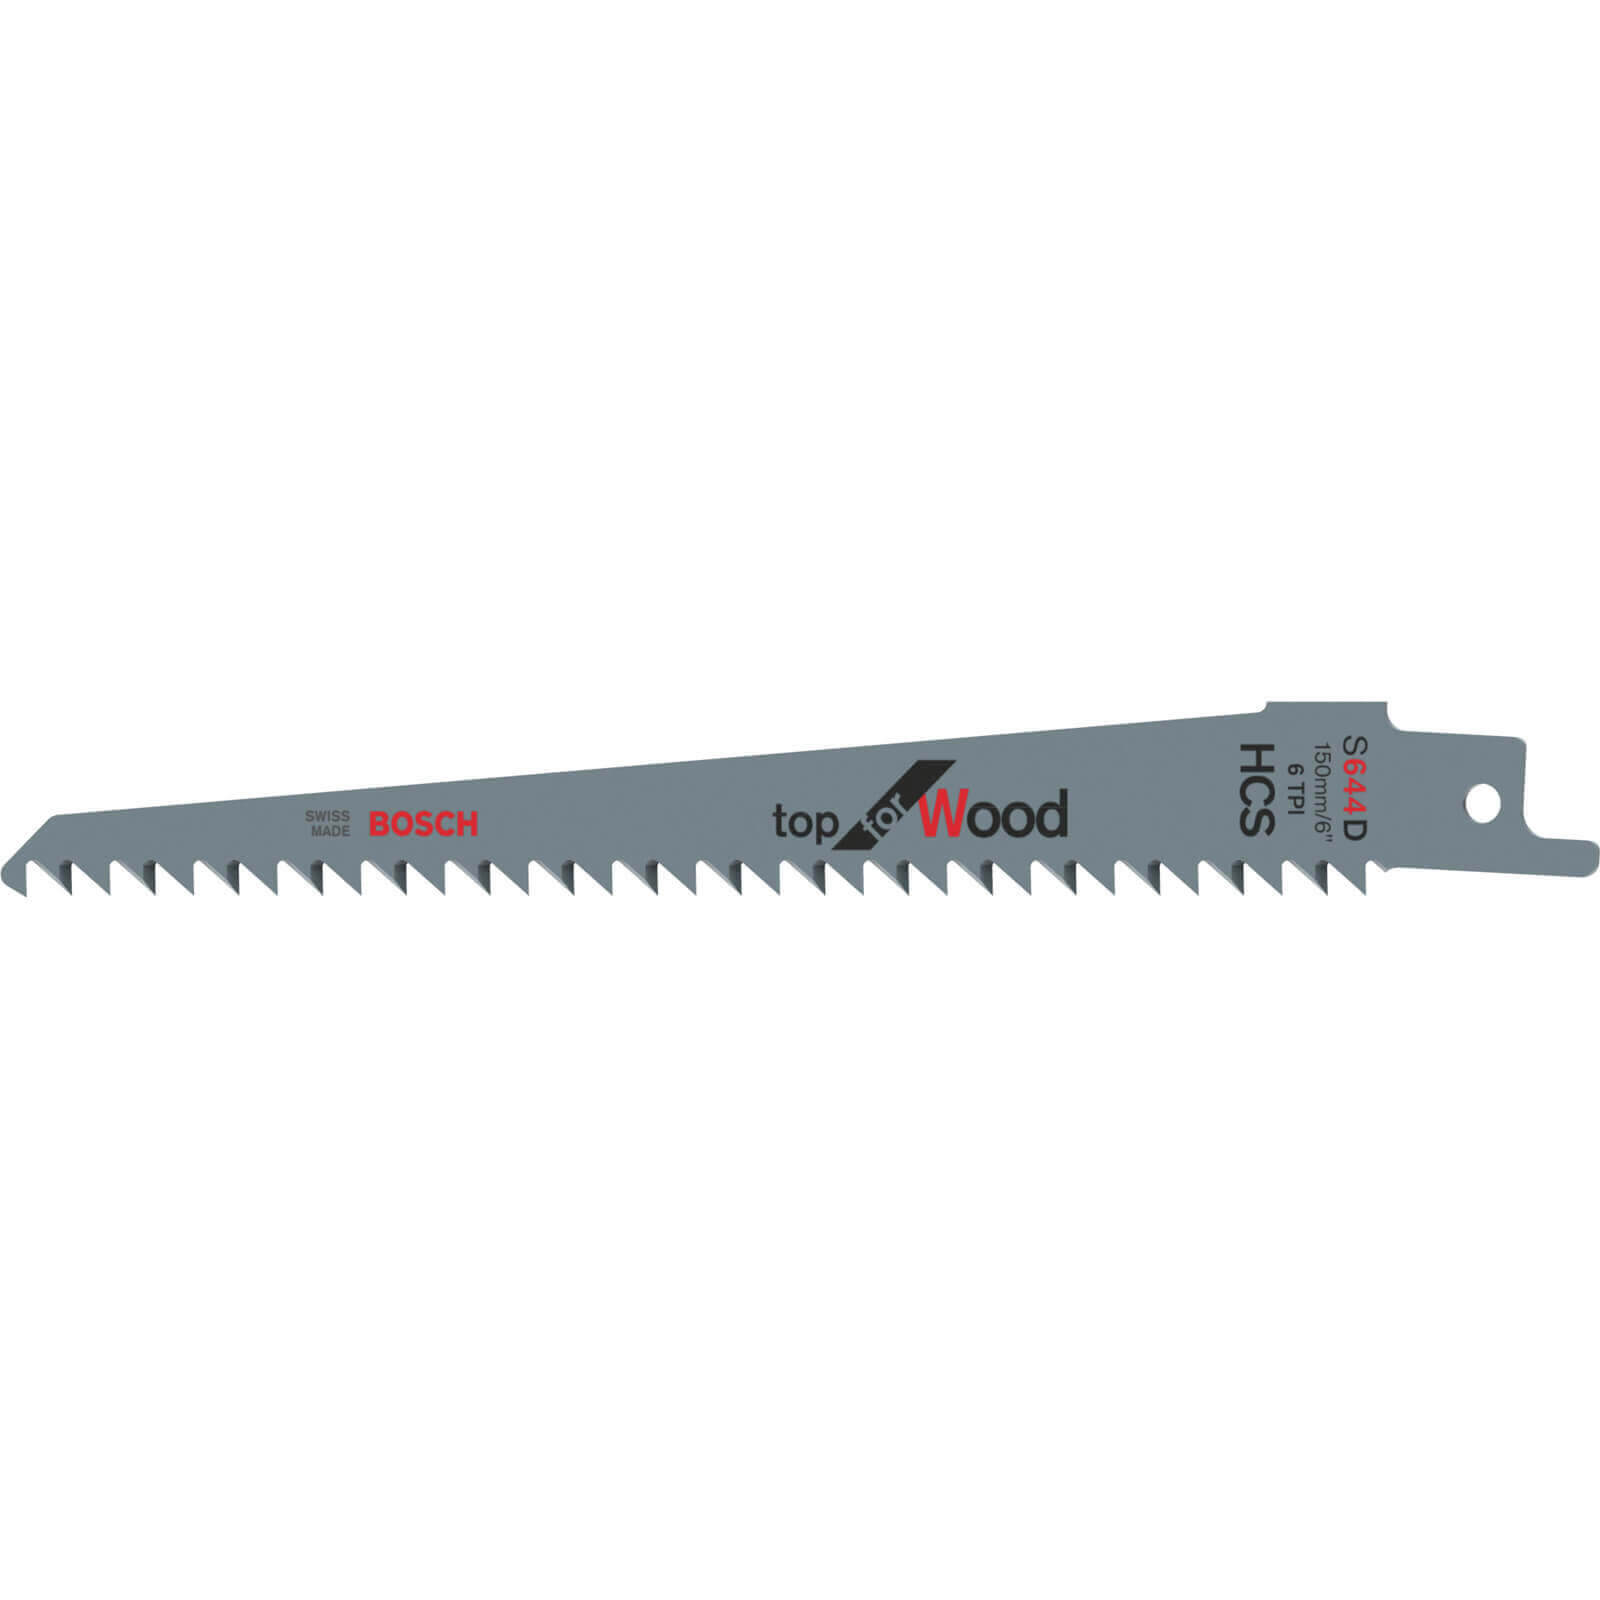 Image of Bosch S644D Reciprocating Sabre Saw Blades Pack of 5